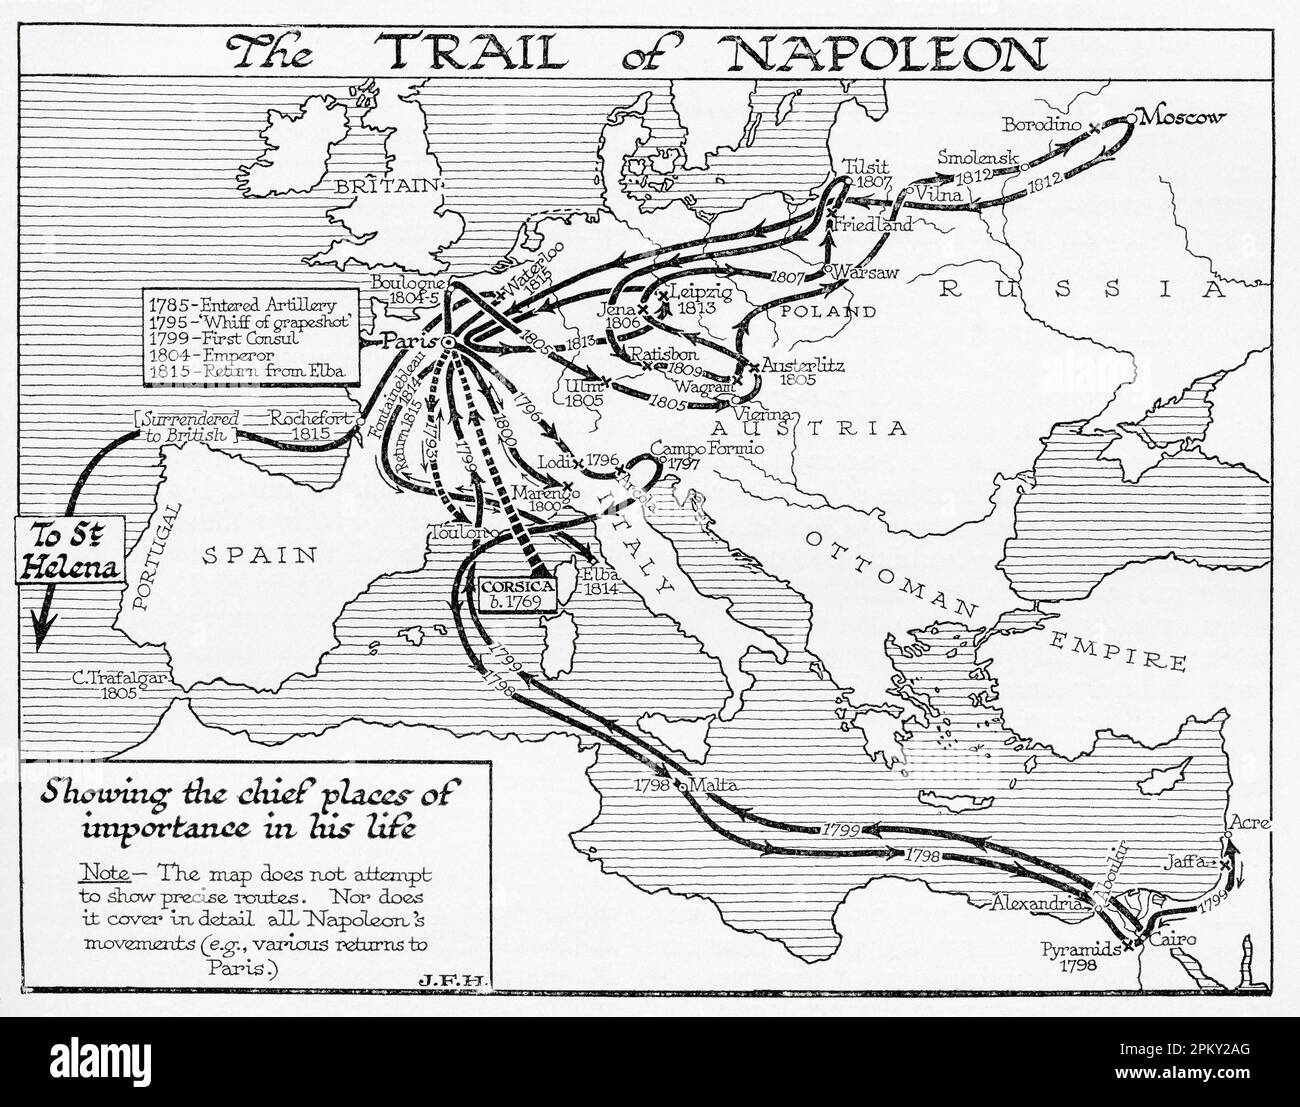 Map showing the trail of Napoleon, 1785-1815.  From the book Outline of History by H.G. Wells, published 1920. Stock Photo